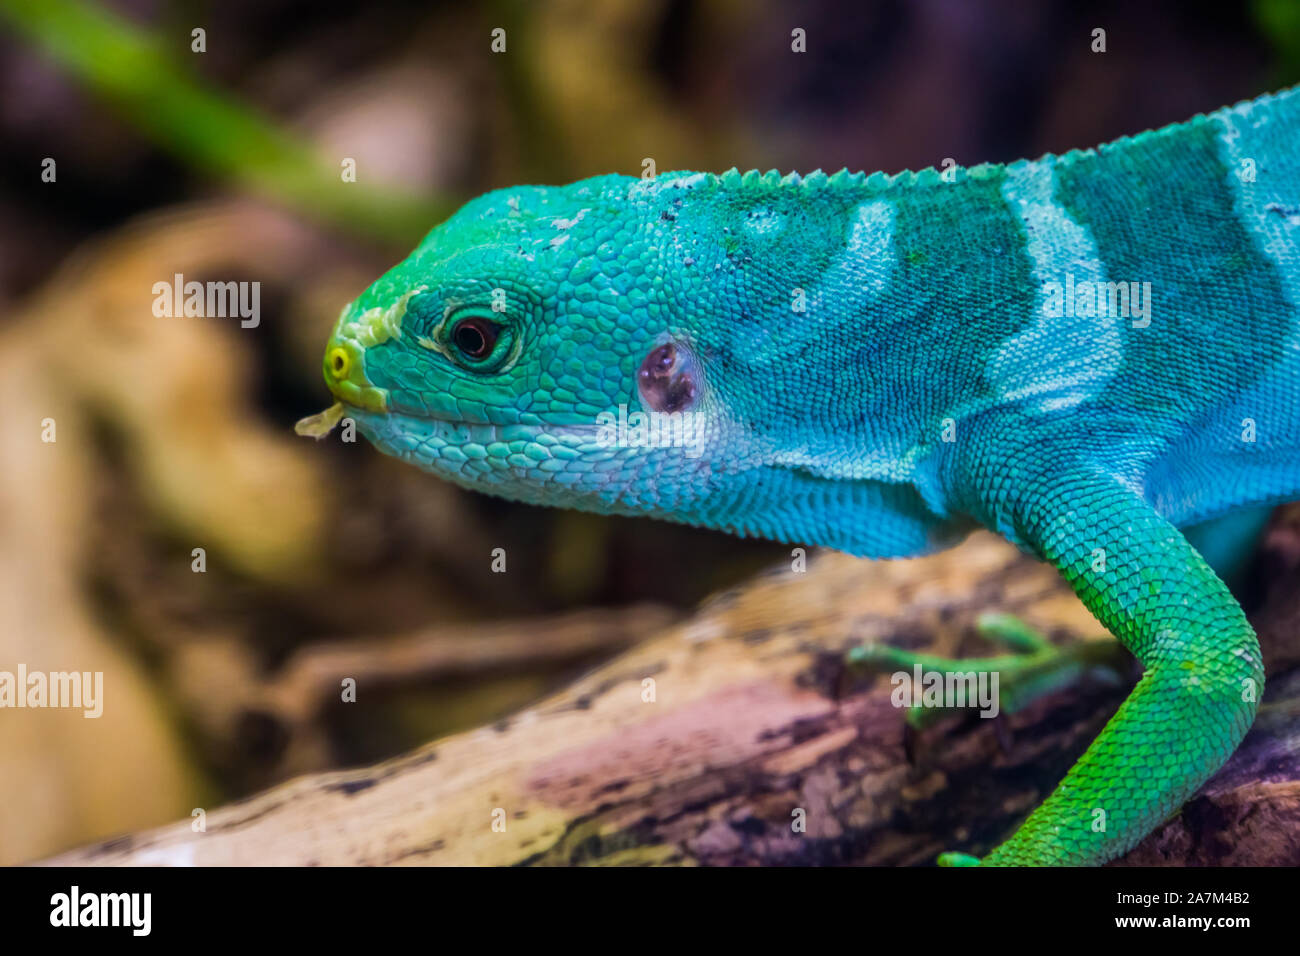 the face of a male fiji banded iguana in closeup, tropical lizard from the fijian islands, Endangered reptile specie Stock Photo